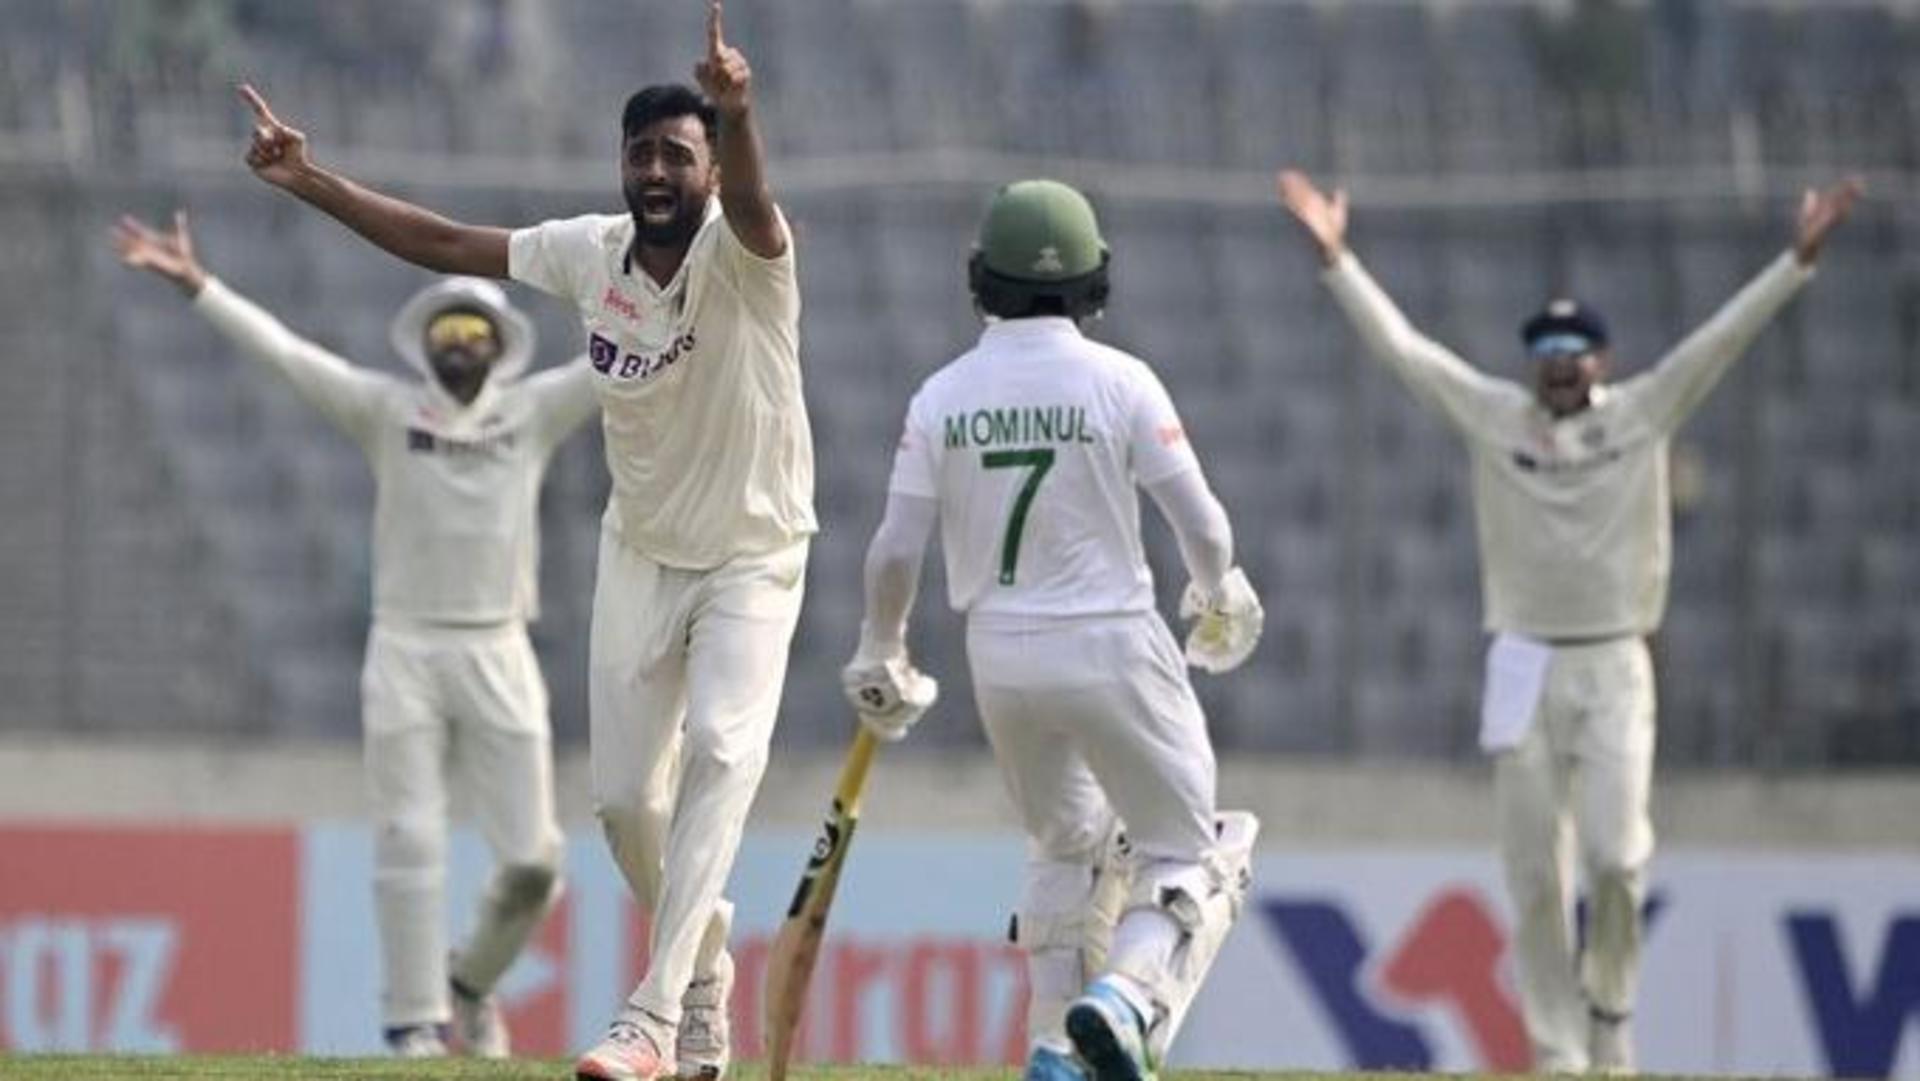 Bangladesh vs India, 2nd Test: Here's what the captains said